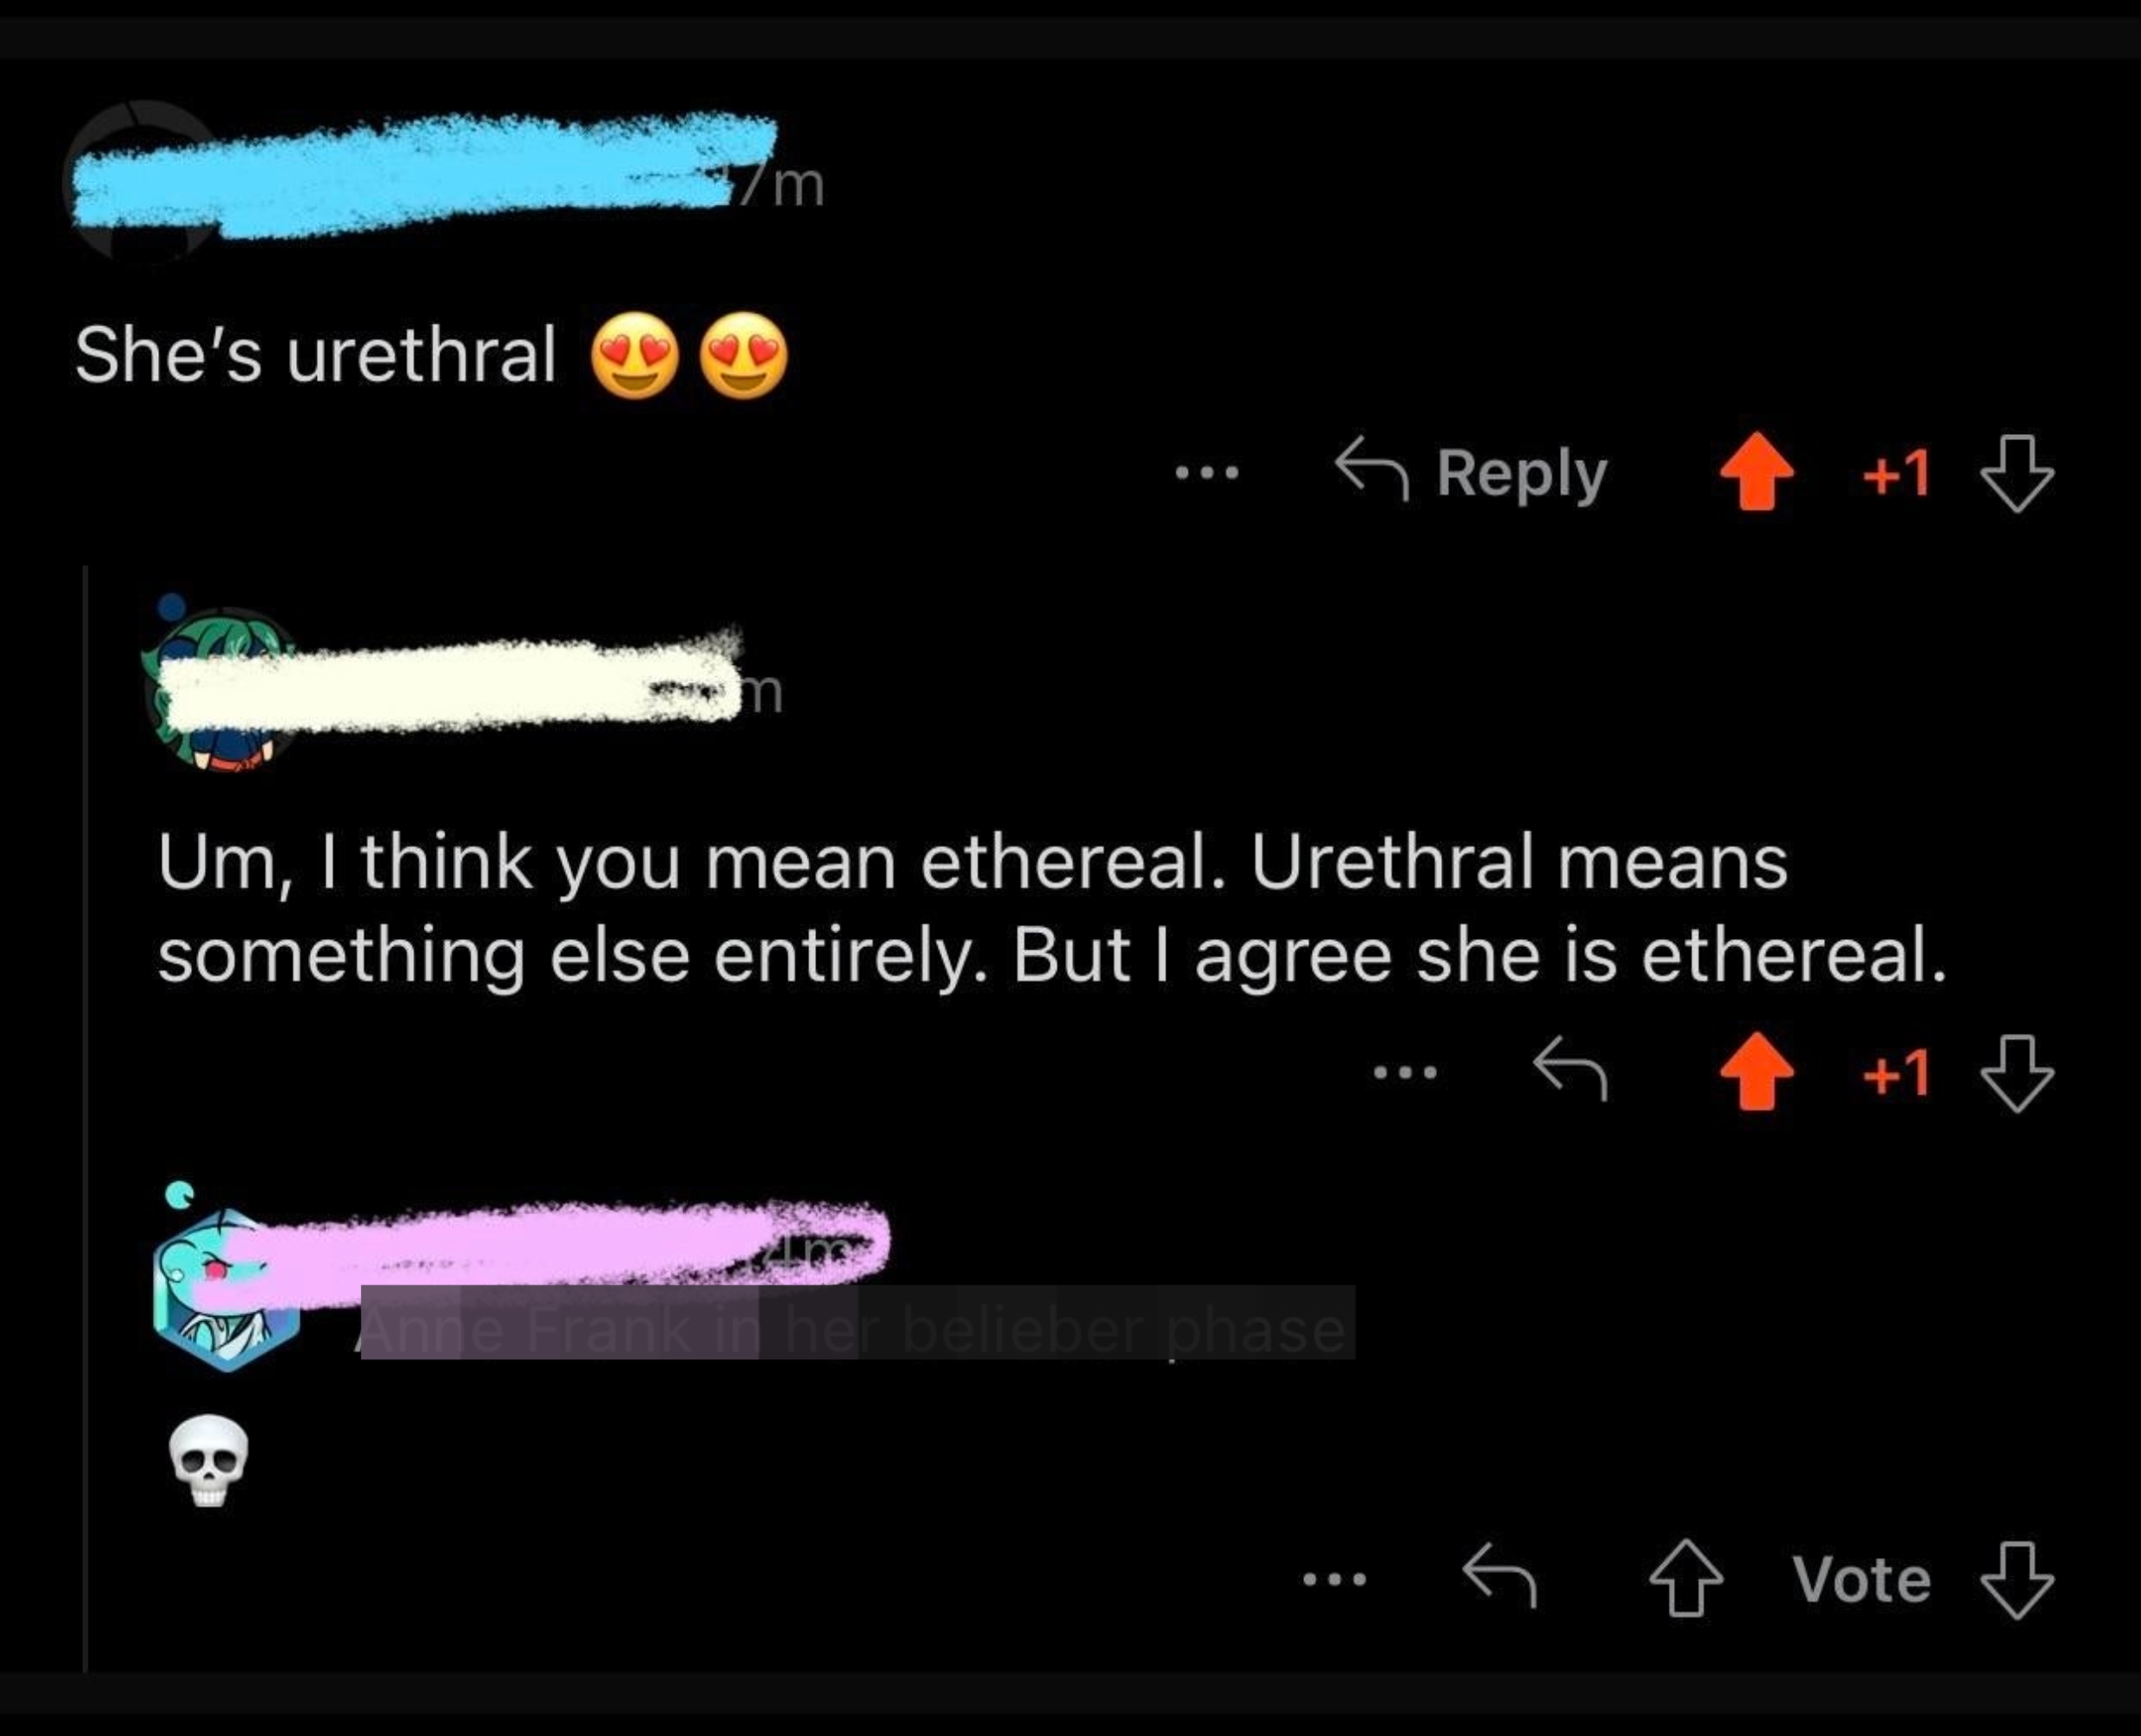 &quot;She&#x27;s urethral&quot;; &quot;Um, I think you mean ethereal; urethral means something else entirely, but I agree she is ethereal&quot;